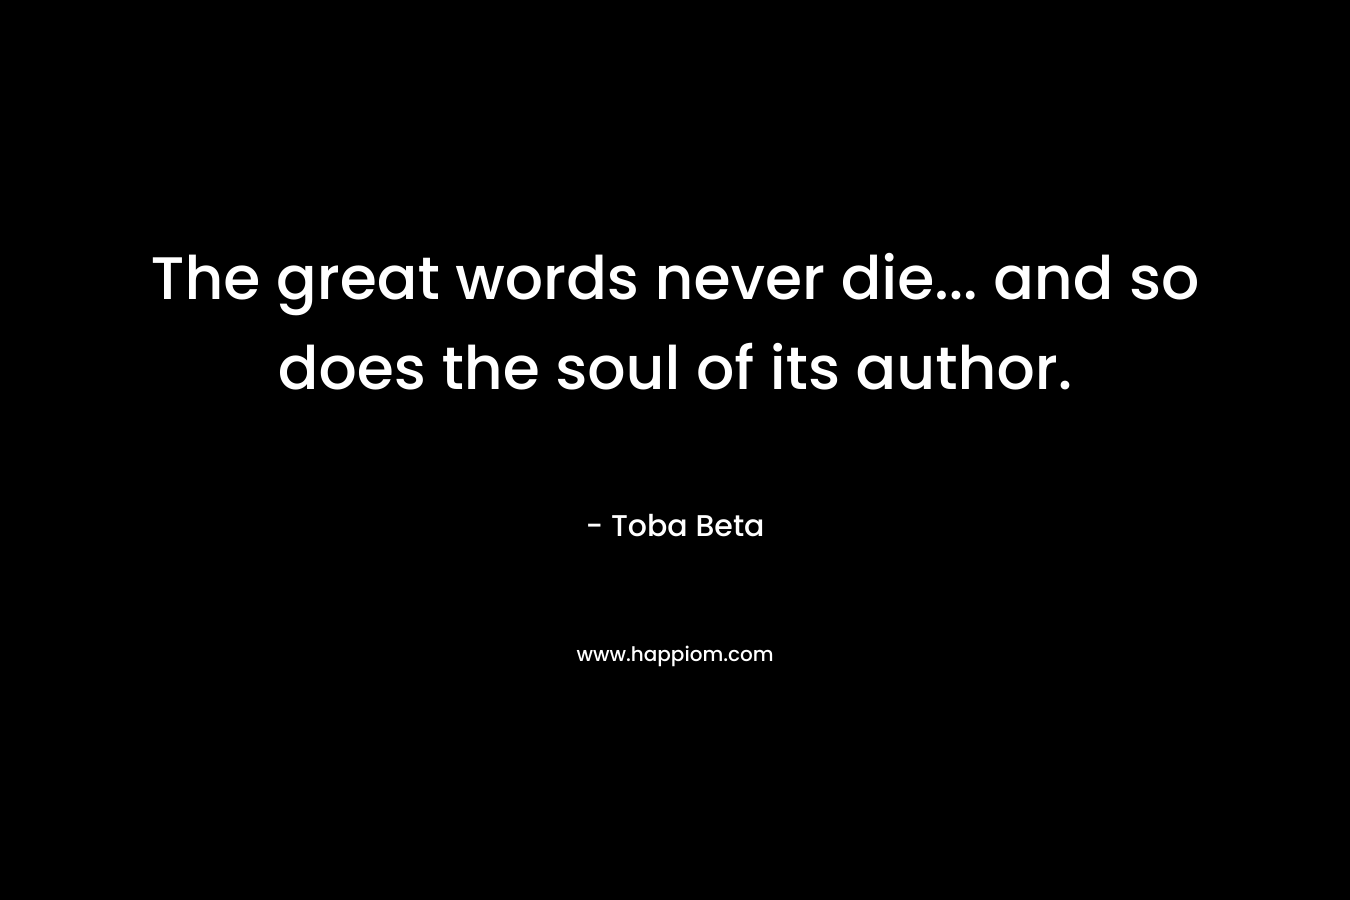 The great words never die... and so does the soul of its author.